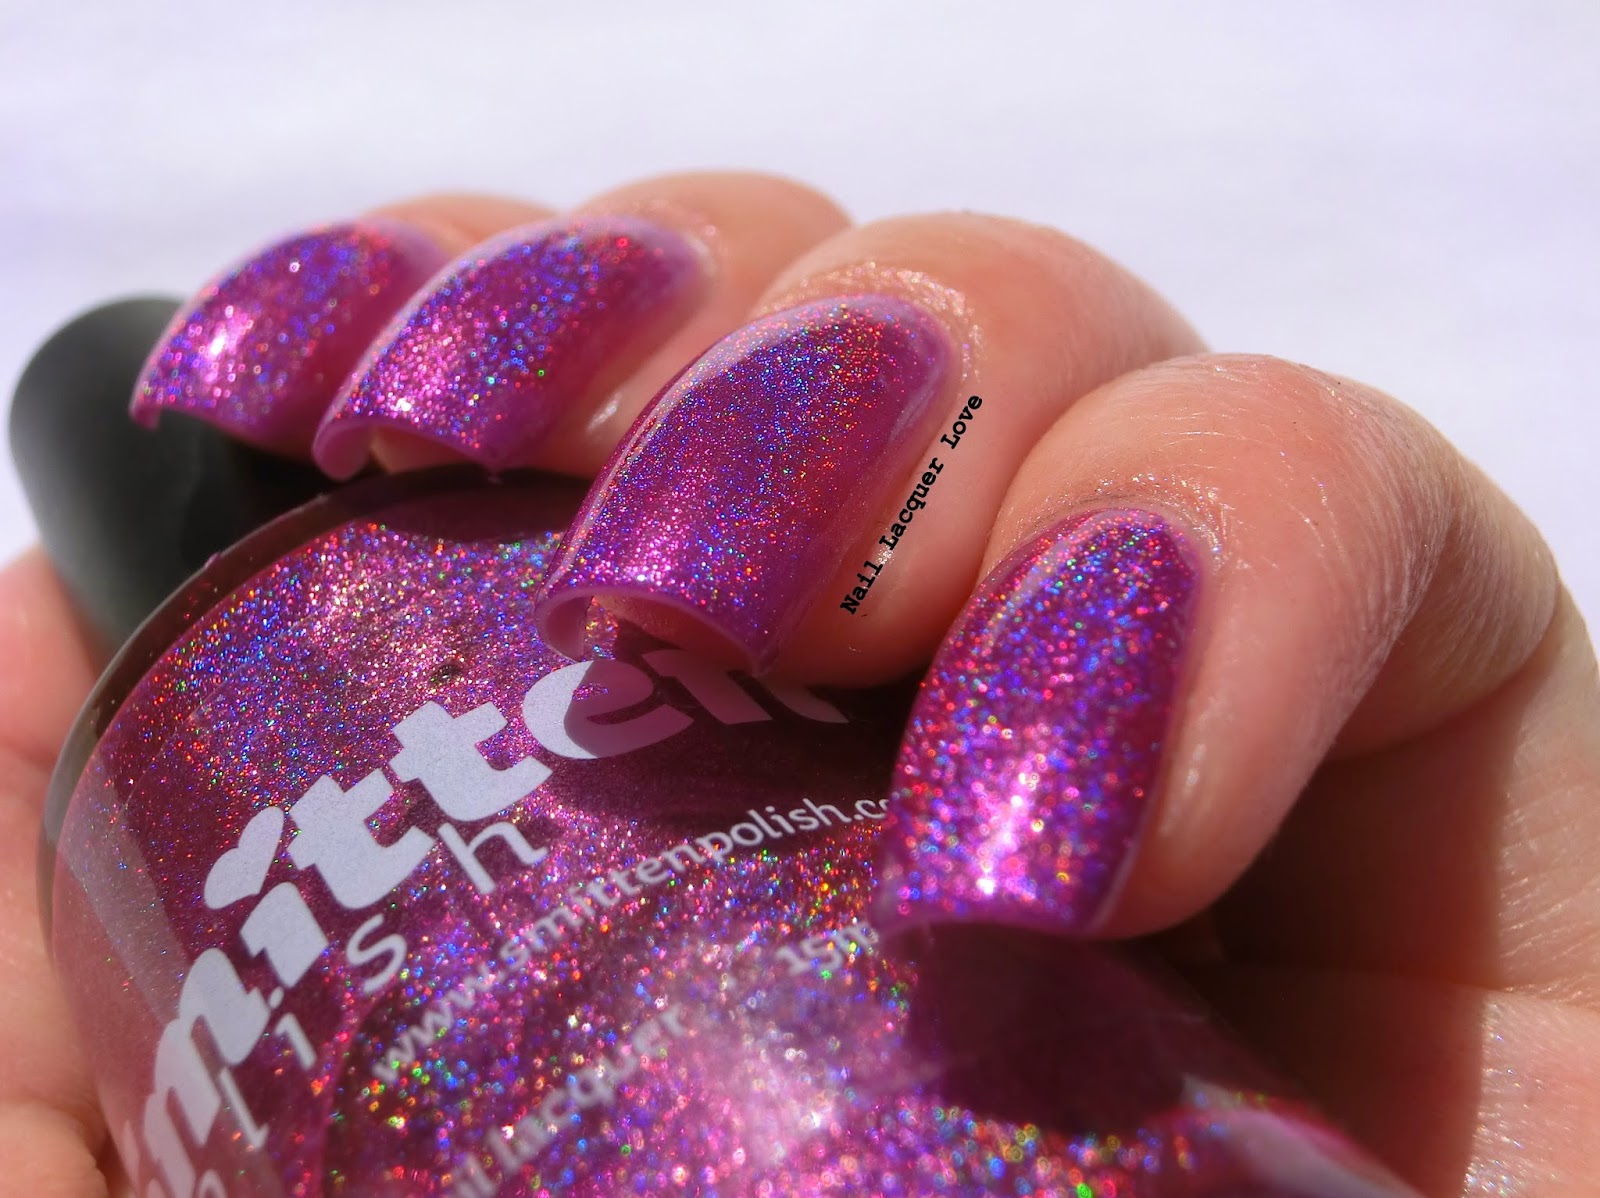 3. Radiant Orchid Nail Lacquer - wide 3